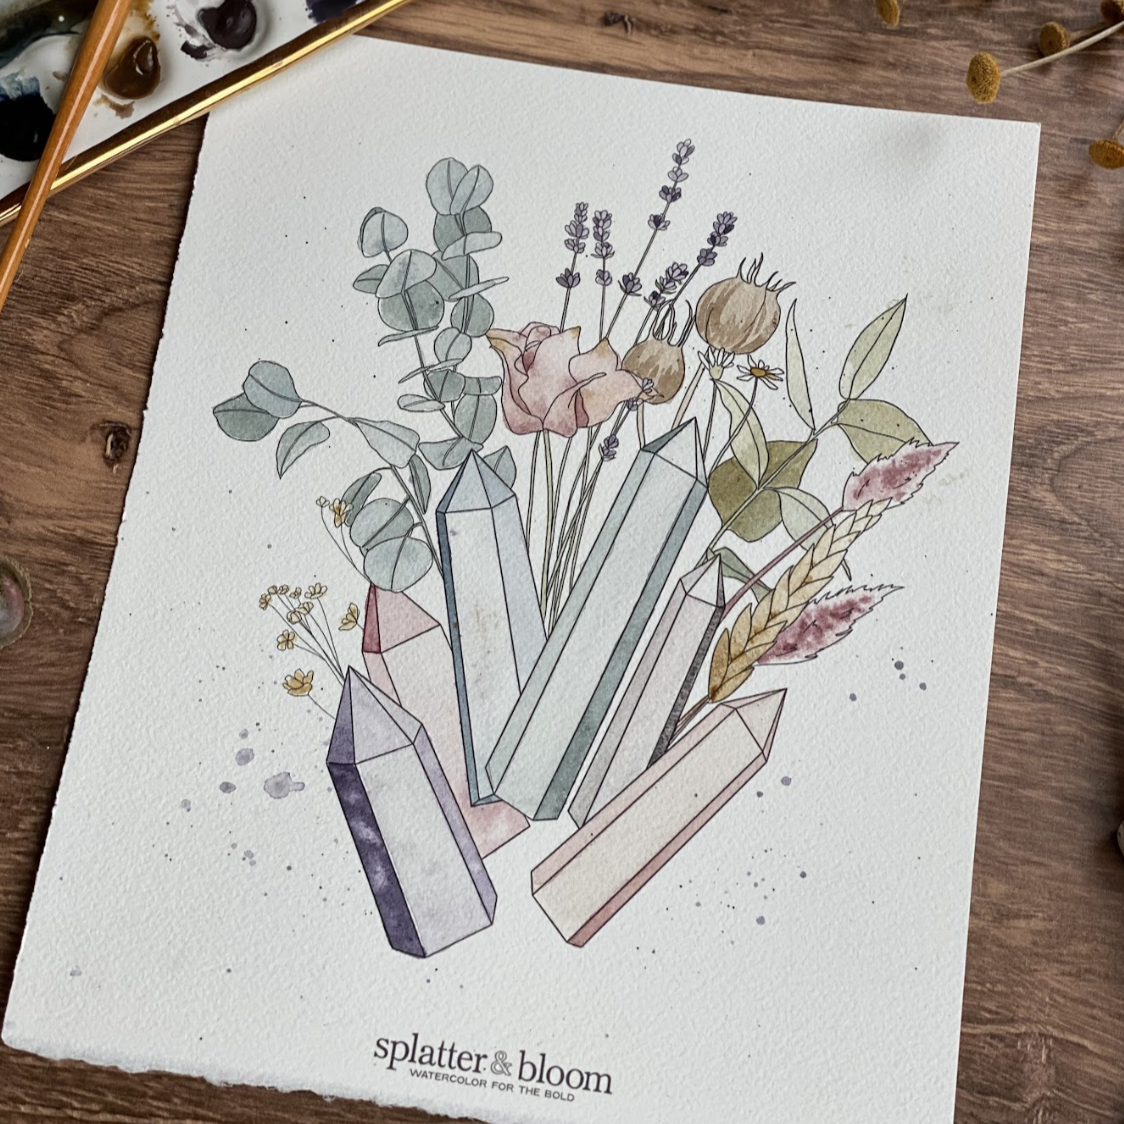 A watercolor painting of crystals and flowers in muted tones. A watercolor paint set and paint brush is in the upper left corner. The background is a wood grain table. 